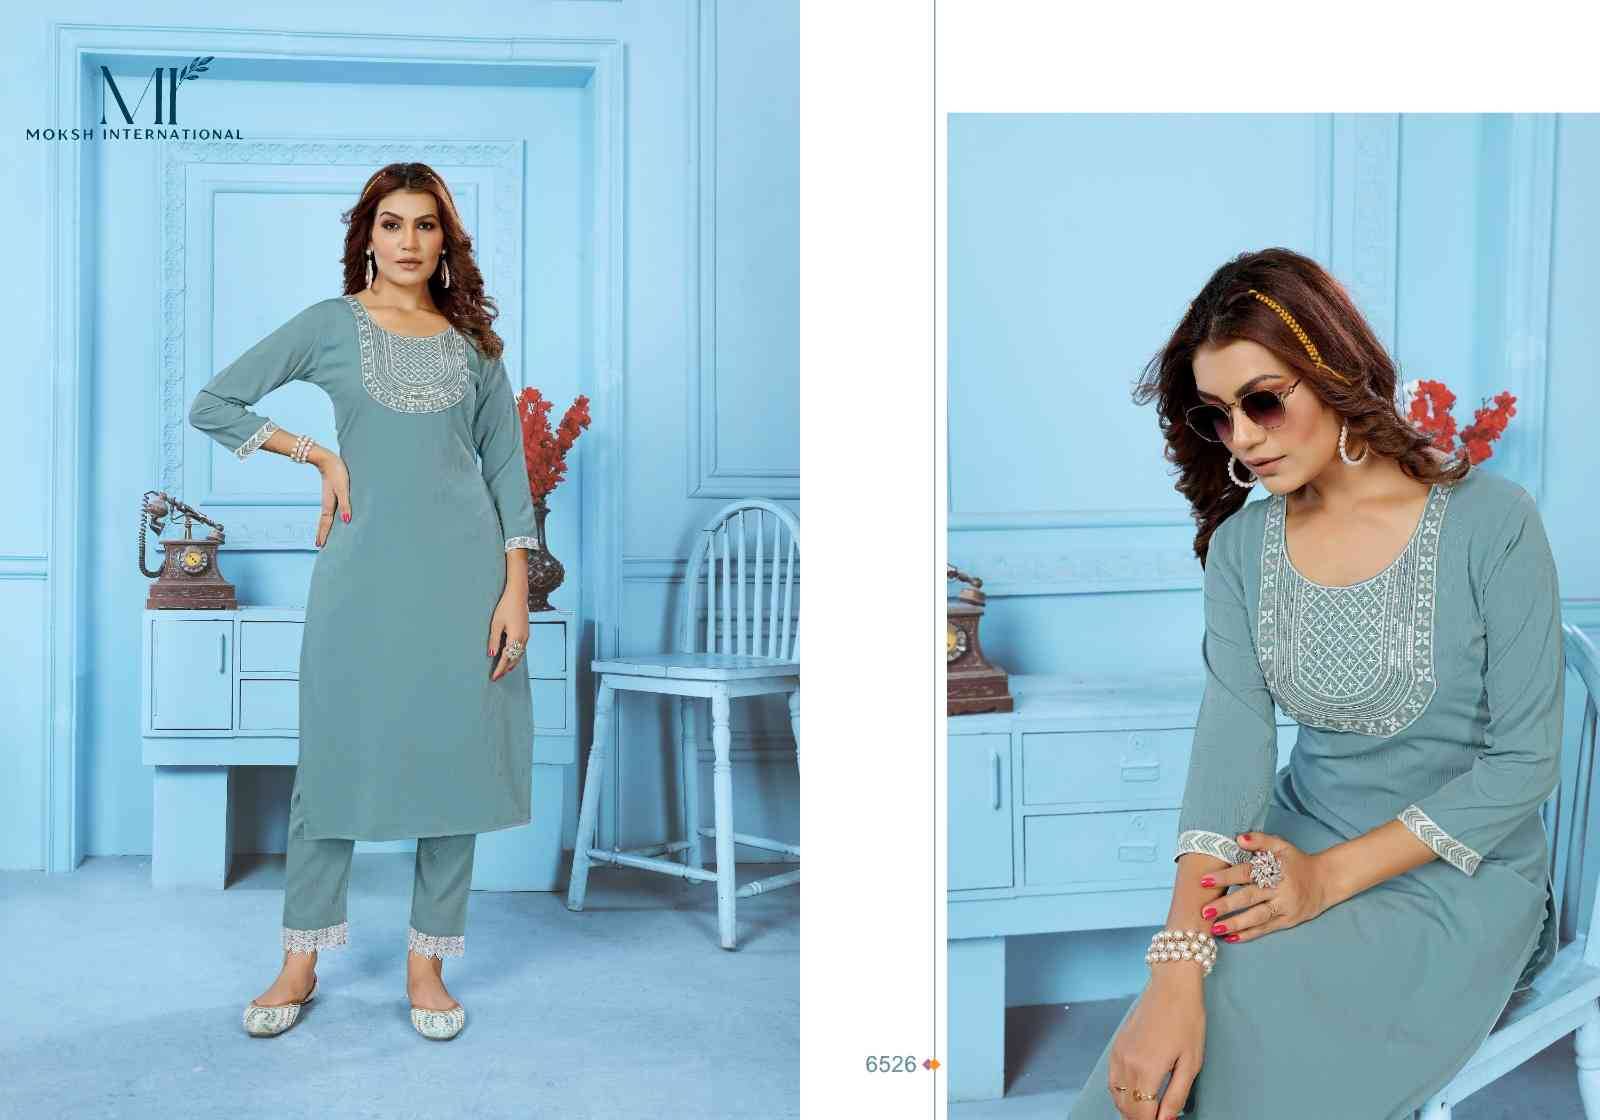 Goldy Vol-1 By Moksh International 6525 To 6529 Series Designer Festive Suits Collection Beautiful Stylish Fancy Colorful Party Wear & Occasional Wear Cotton Embroidered Kurtis With Bottom At Wholesale Price